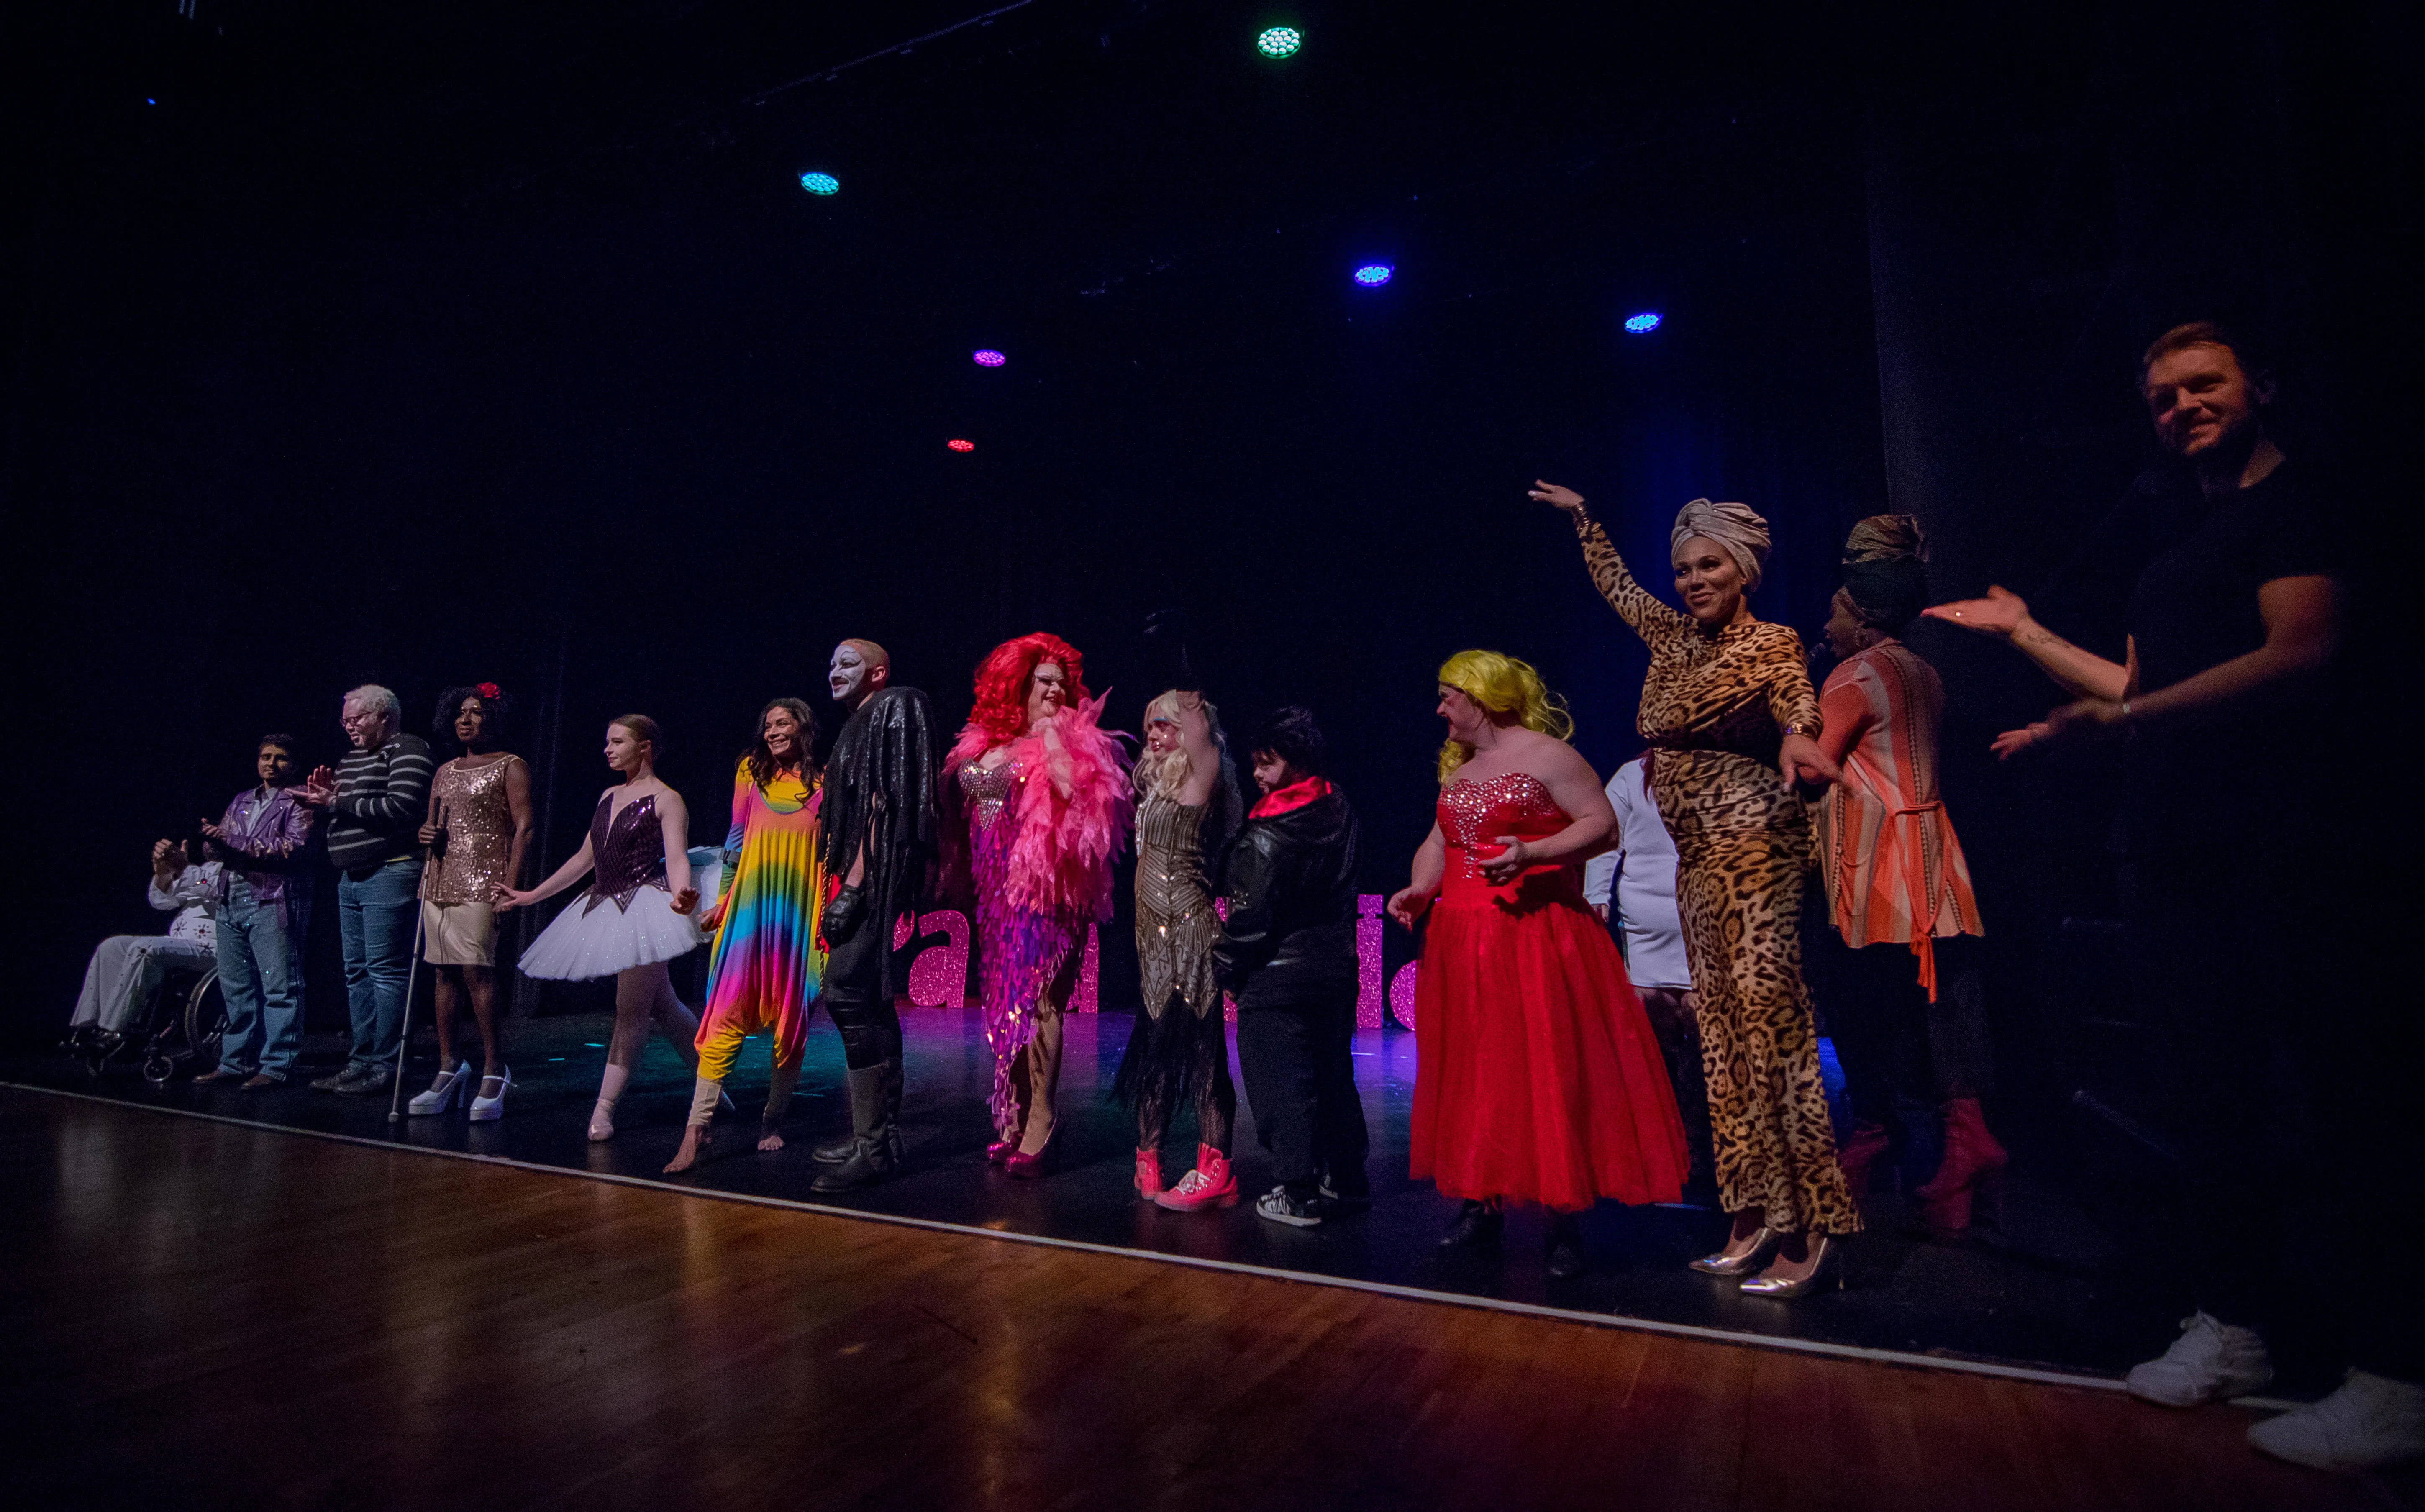 Performers face the audience during the curtain call at ParaPride Stratford Circus Arts Centre Takeover held in February 2020